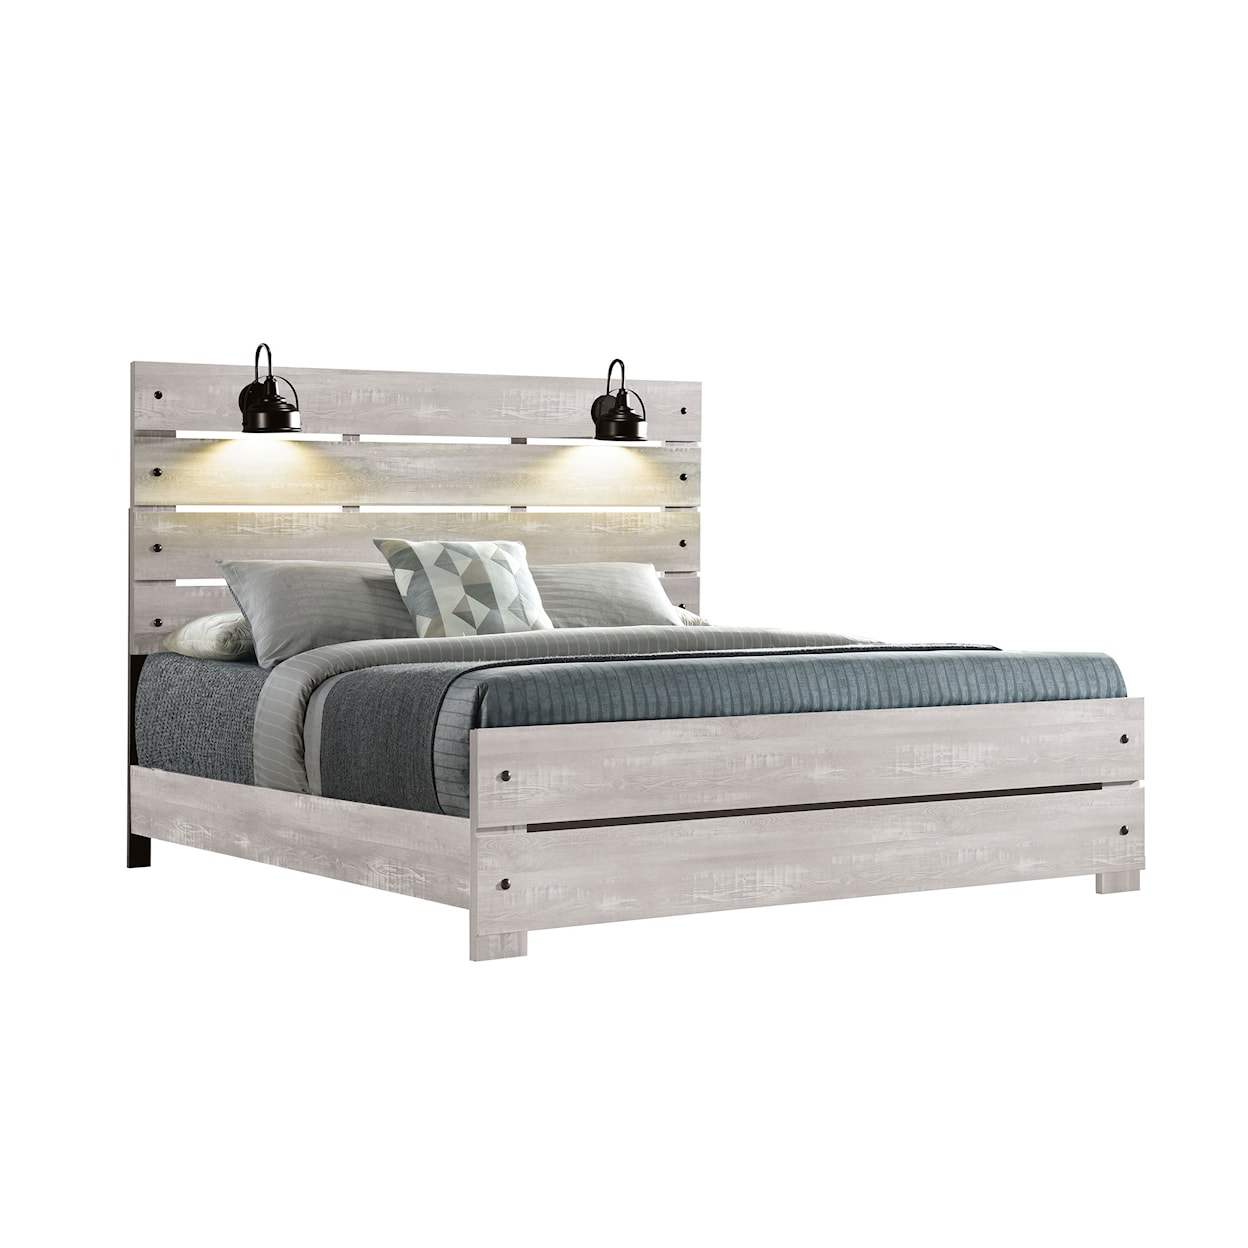 Global Furniture LINWOOD King Bed with Lamps